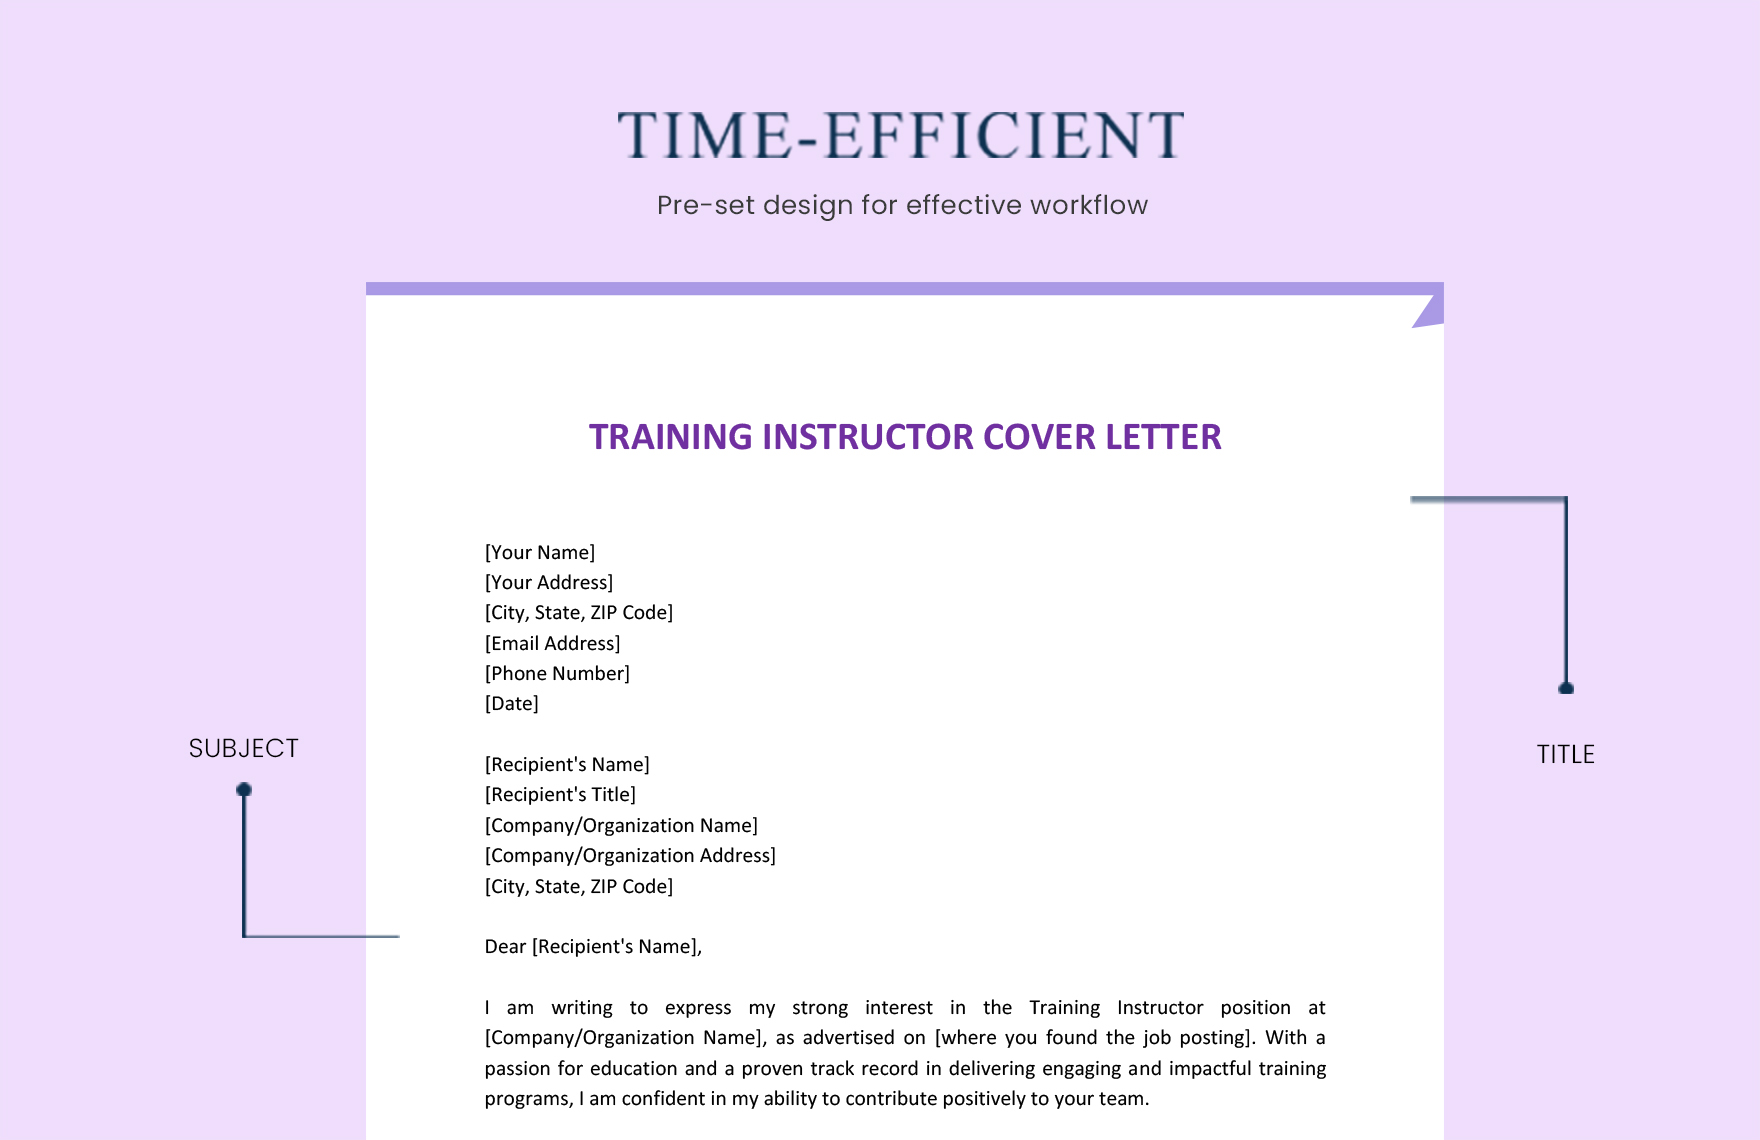 Training Instructor Cover Letter